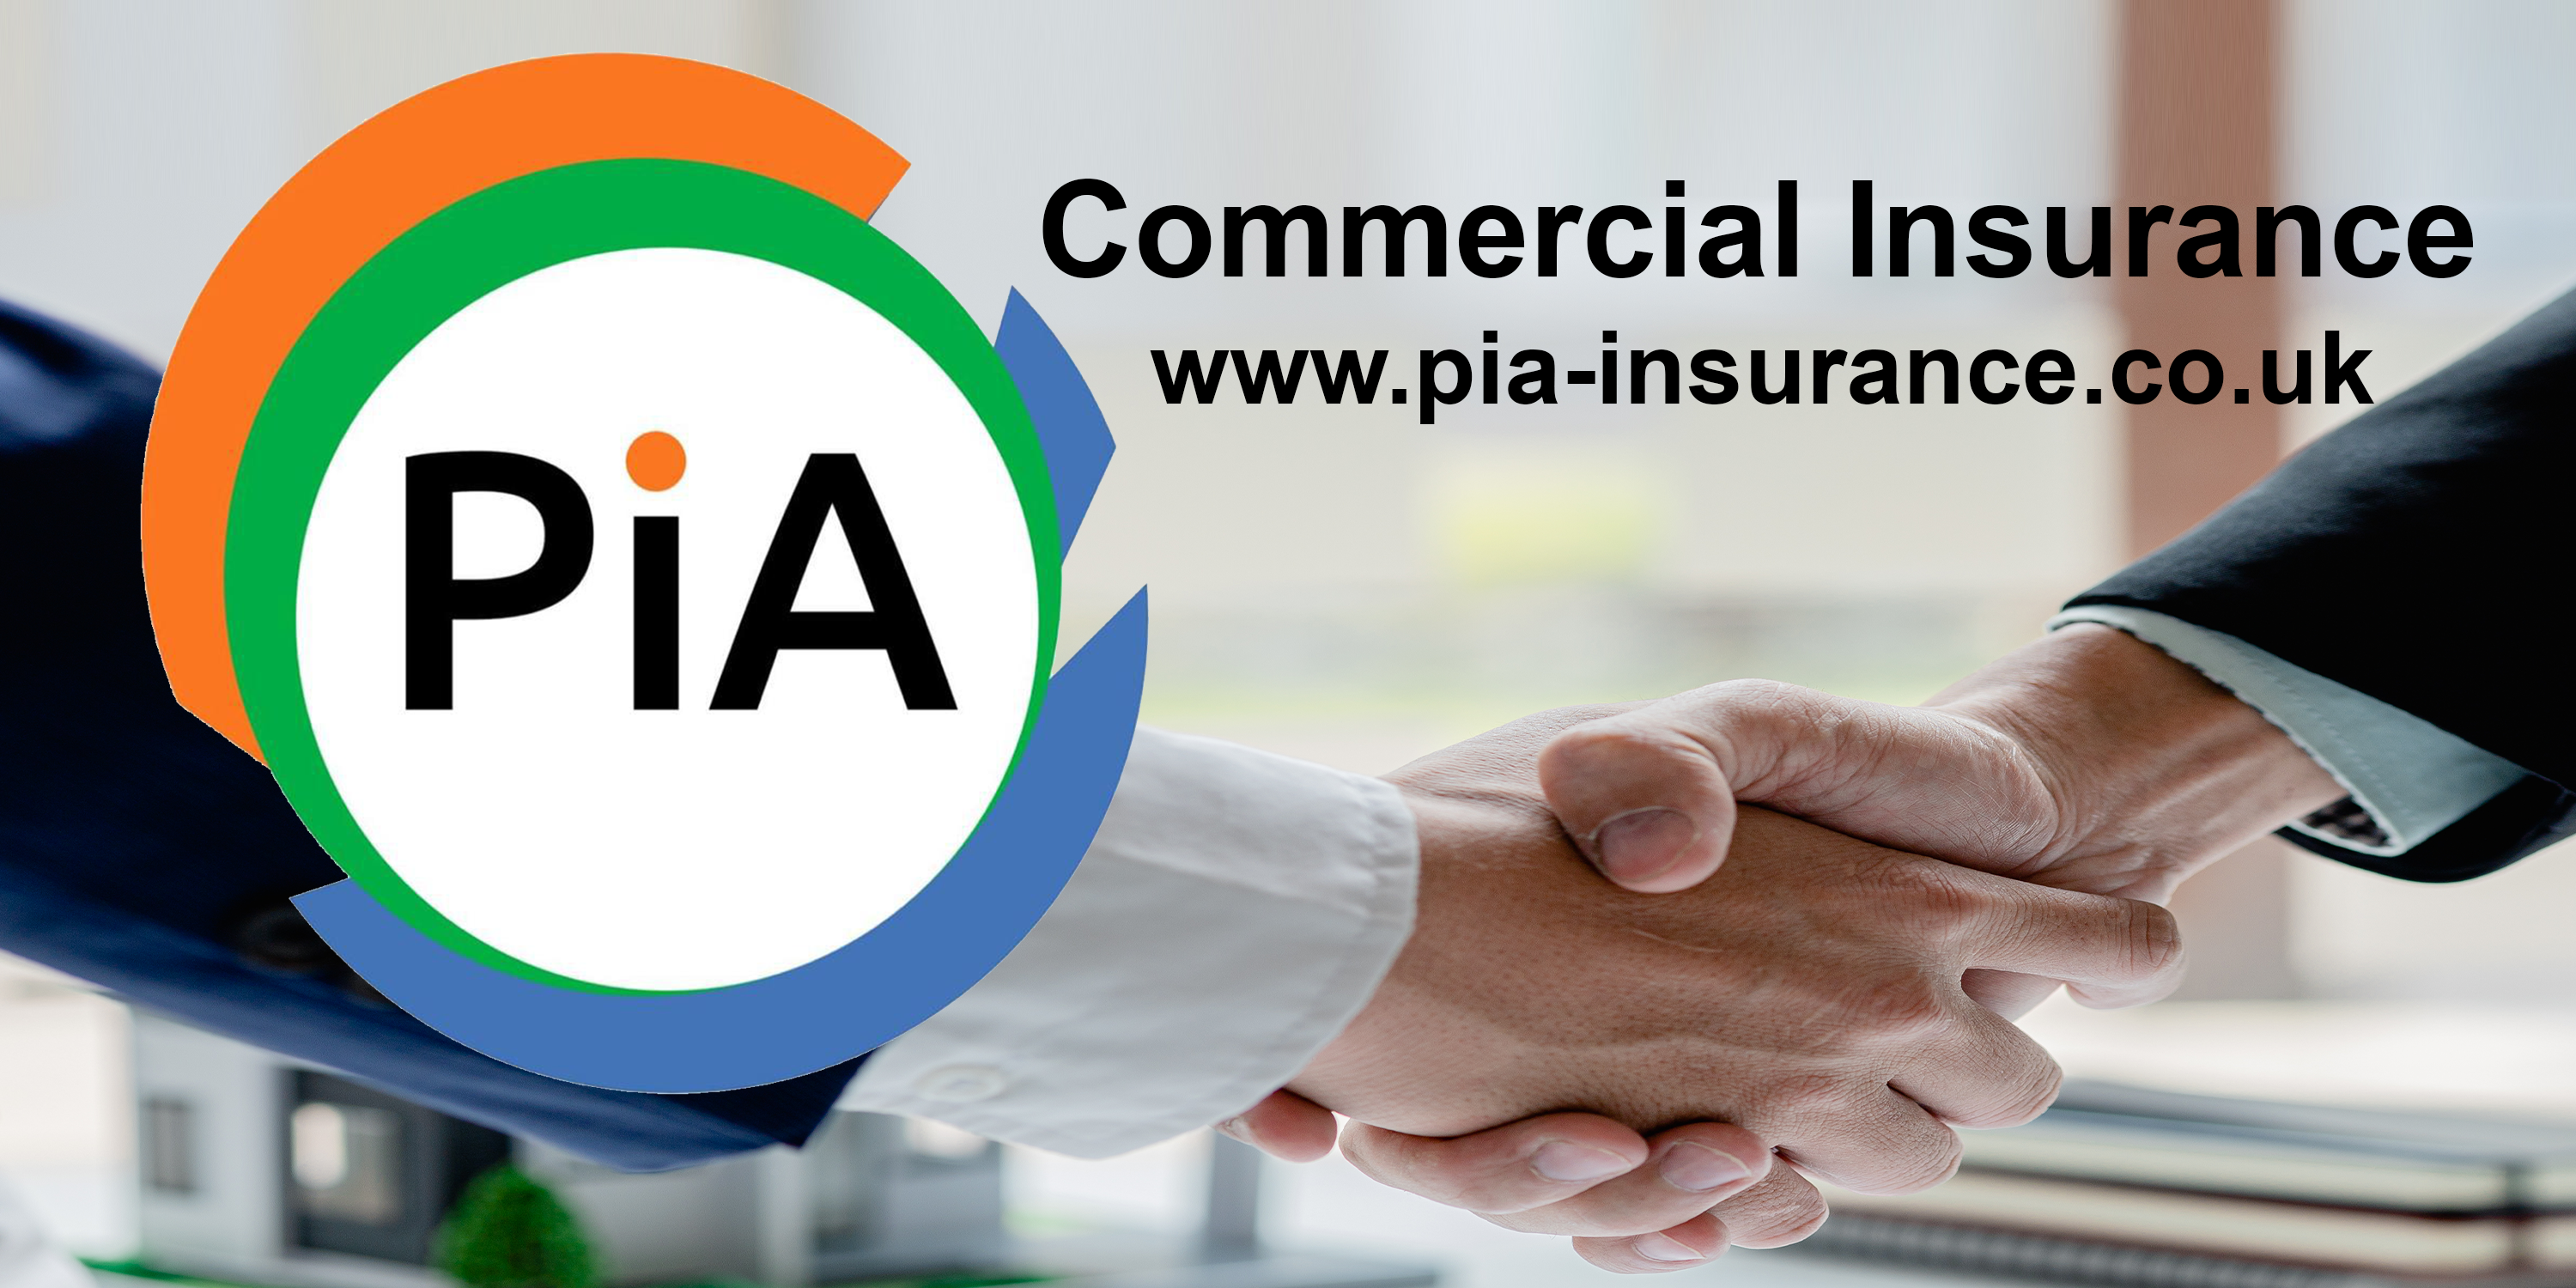 PIA Business Insurance